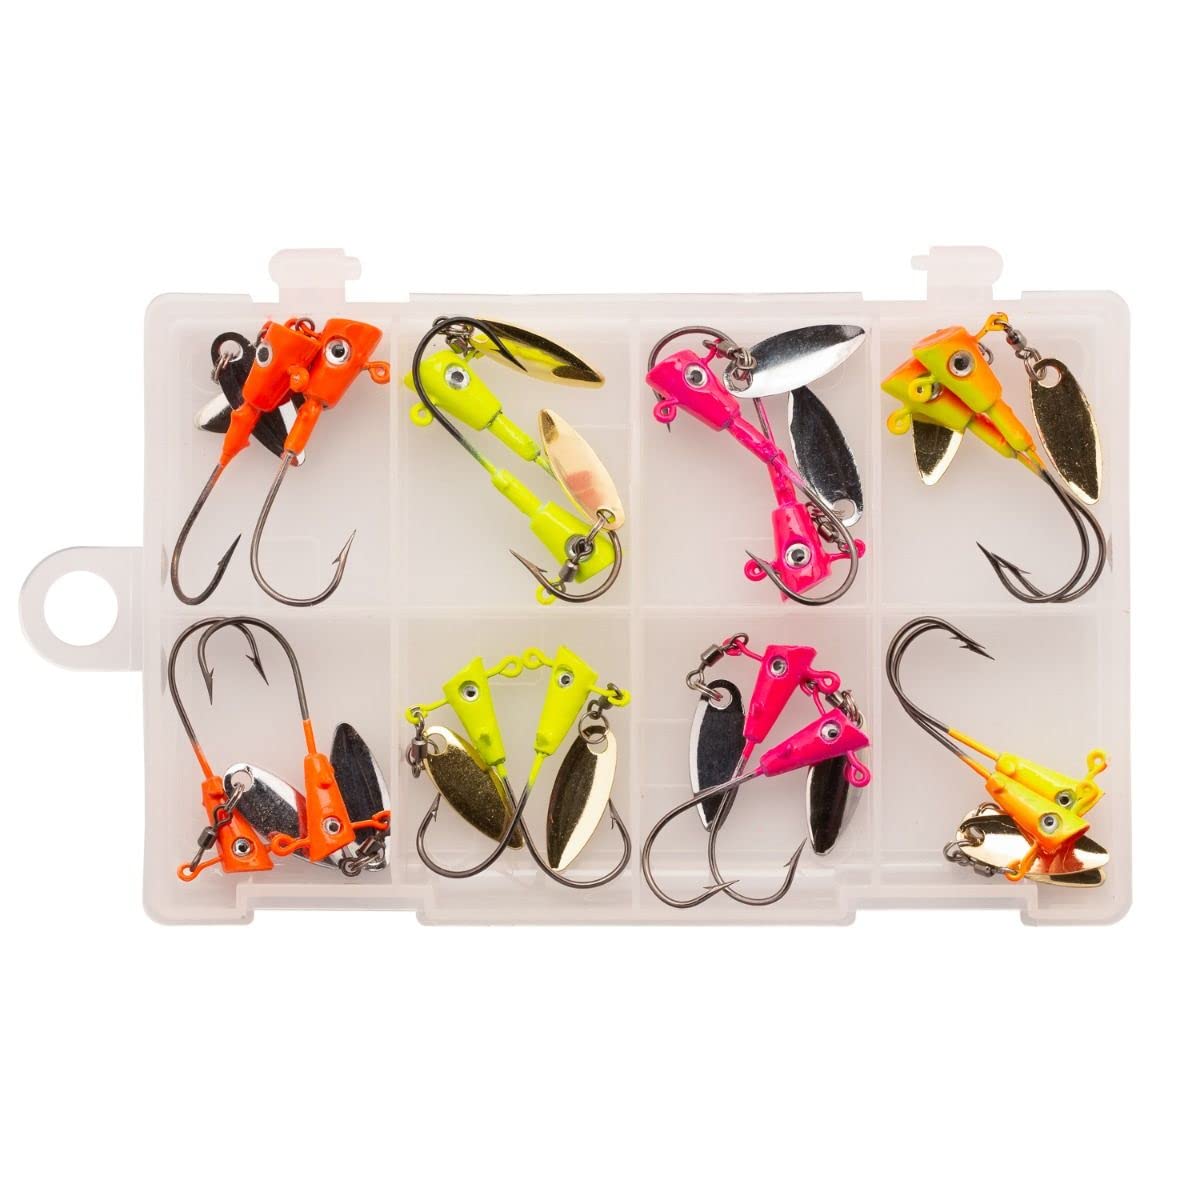 Crappie Magnet Fin Spin Kit, Freshwater Fishing Equipment and